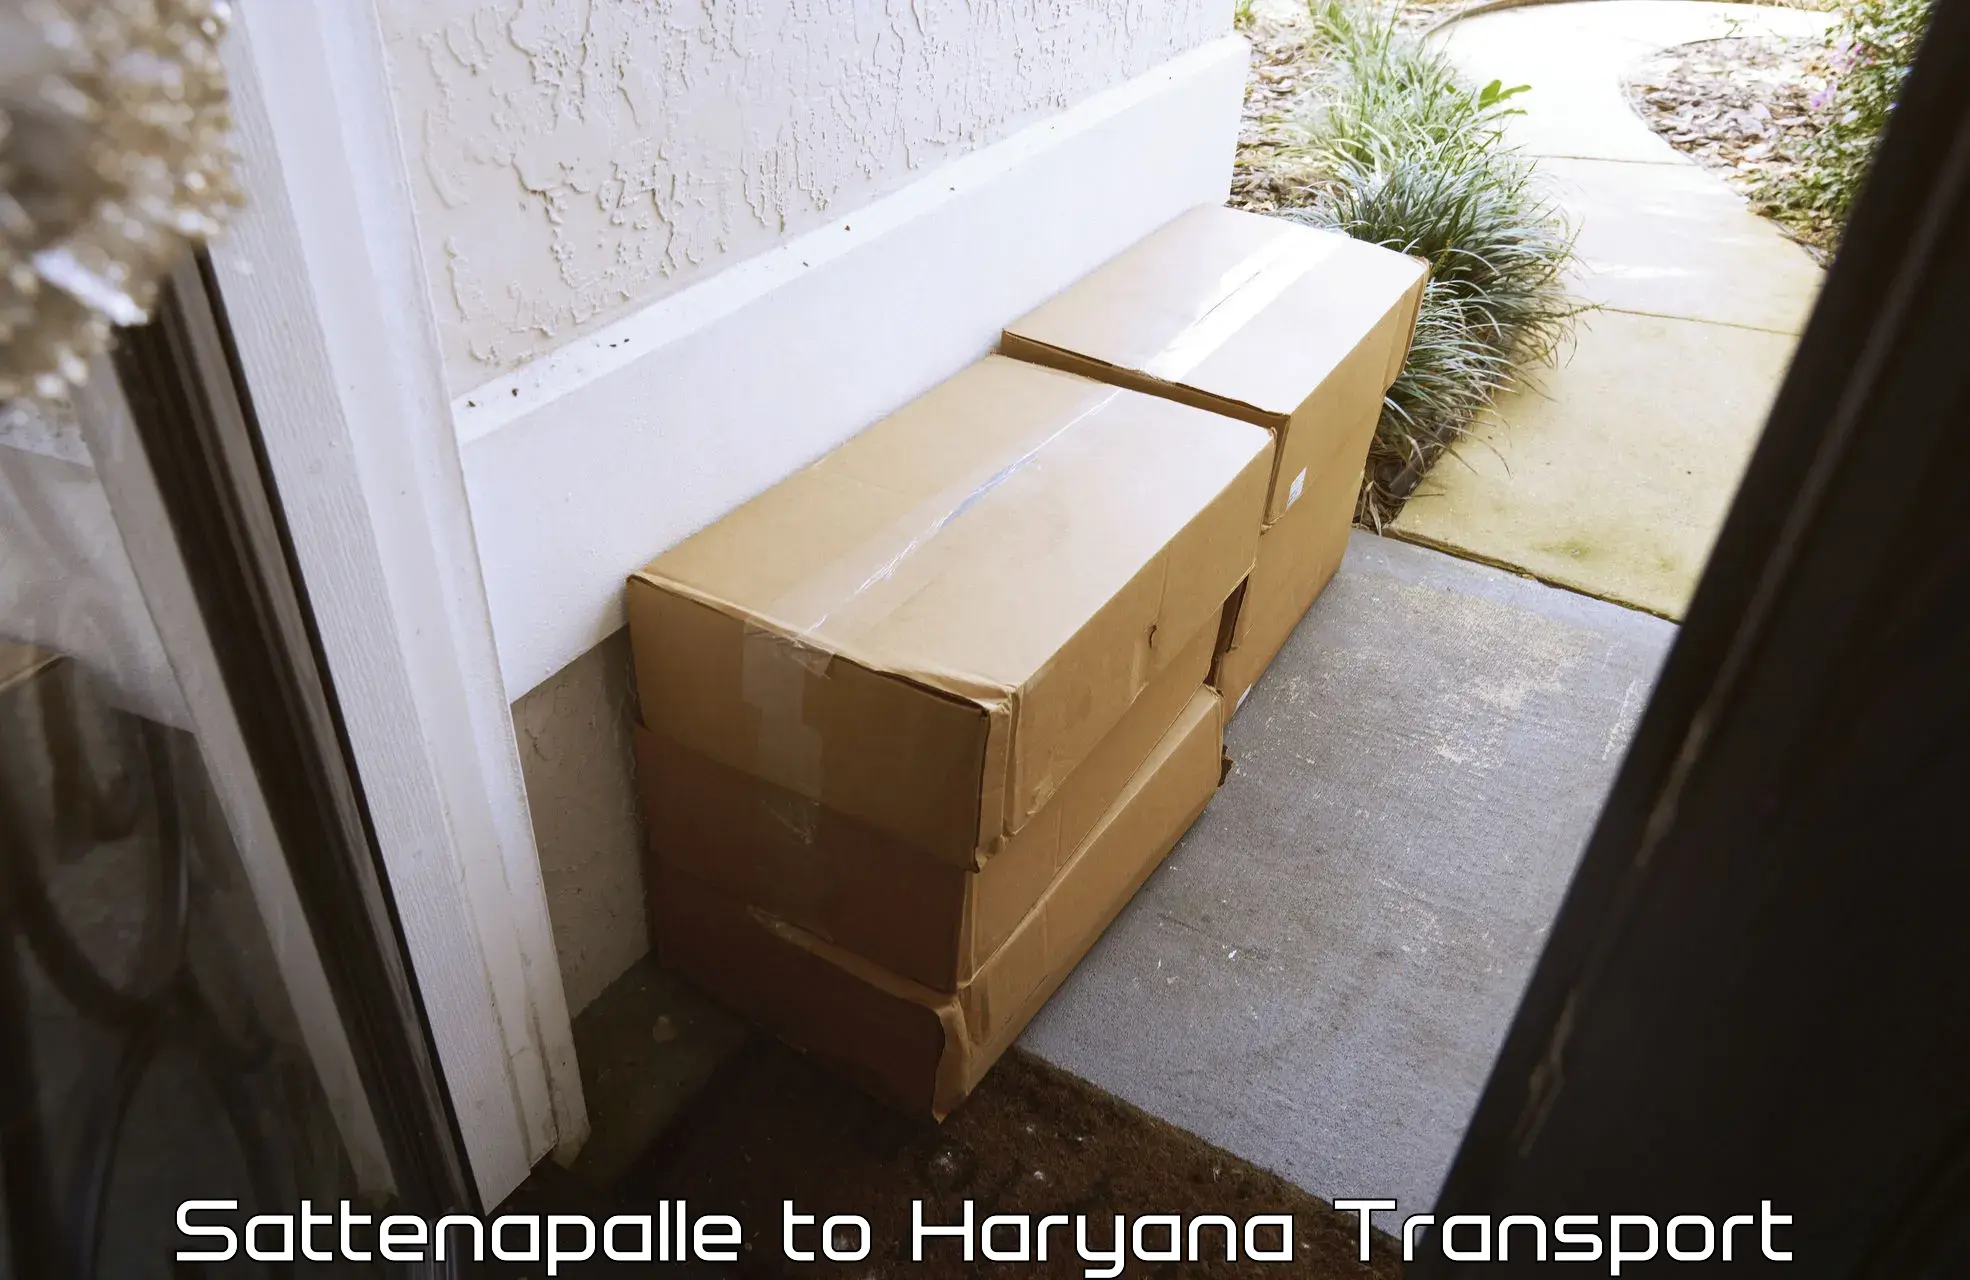 Goods delivery service Sattenapalle to NCR Haryana